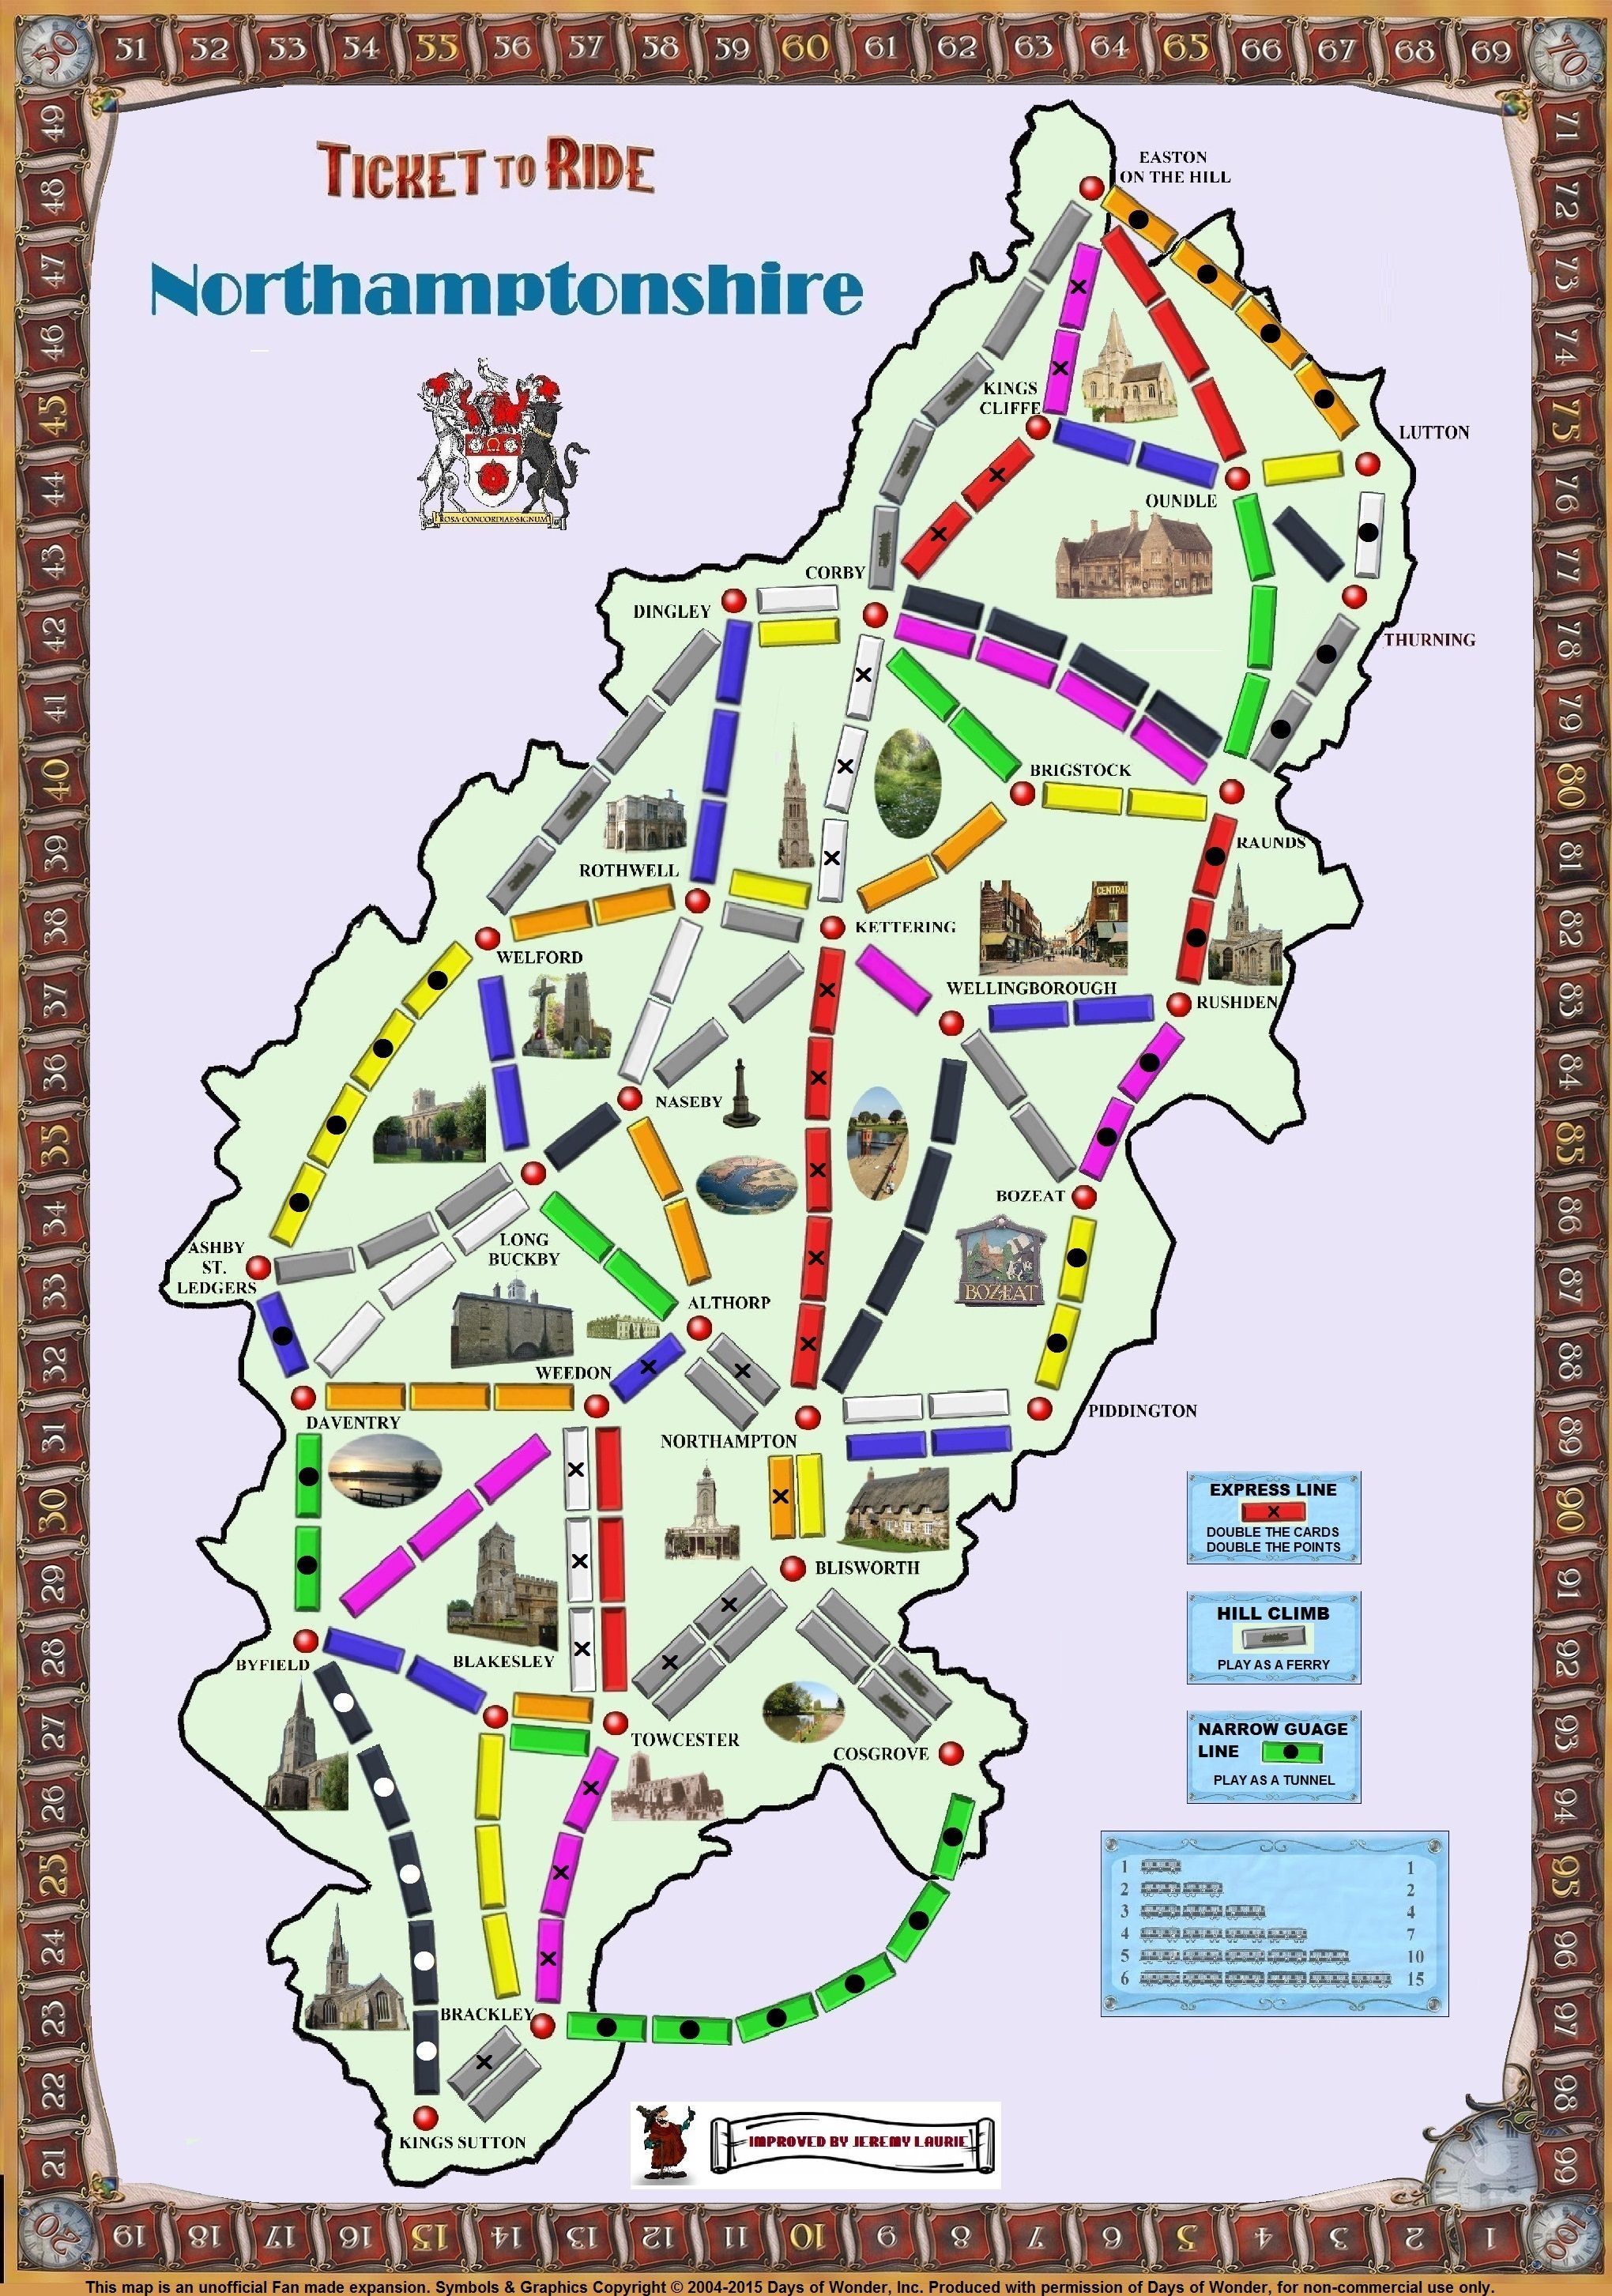 Northamptonshire (fan expansion for Ticket to Ride)